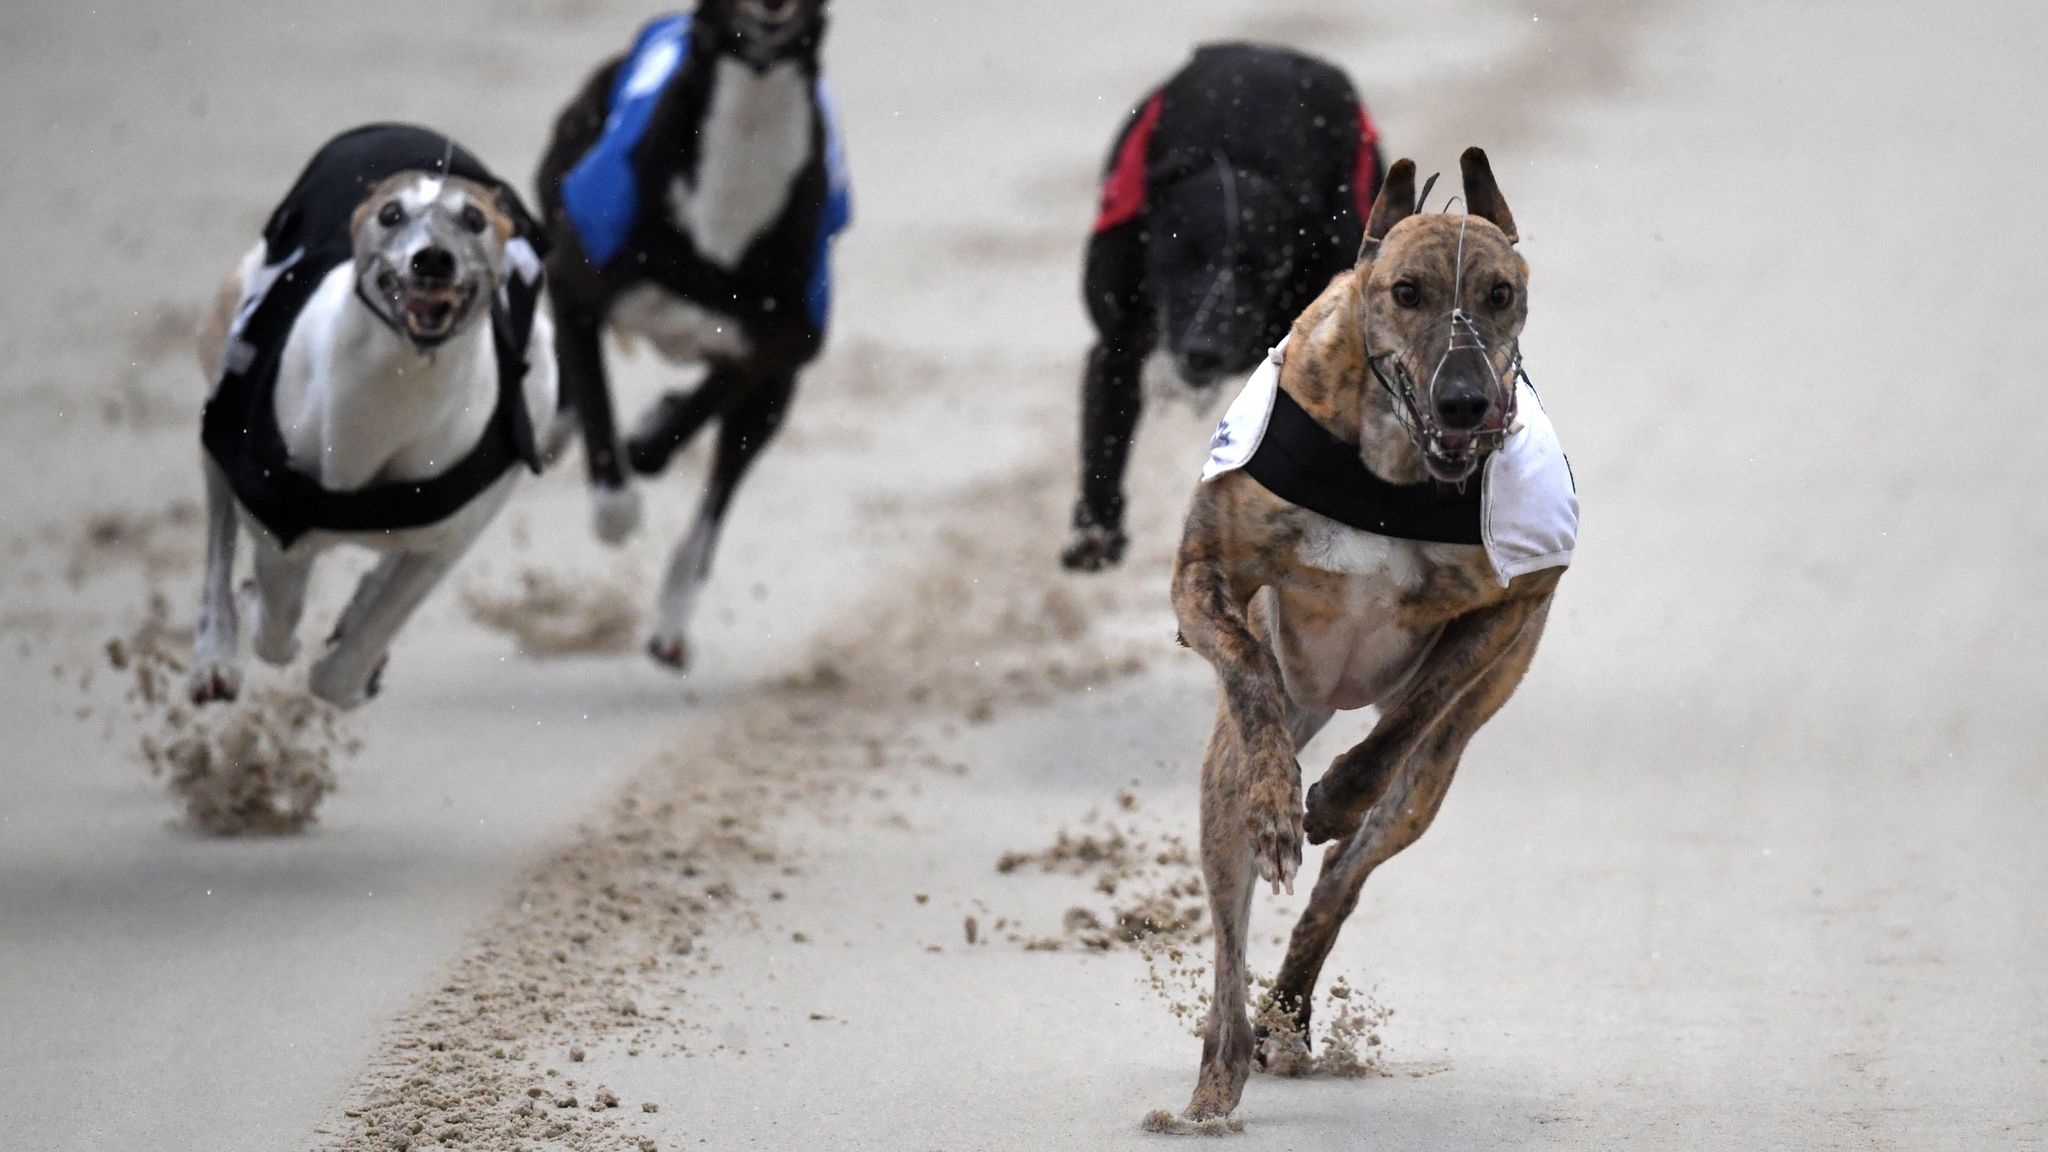 Calls to Ban Greyhound Racing in Scotland After Tests Reveal Dogs Doped with Cocaine